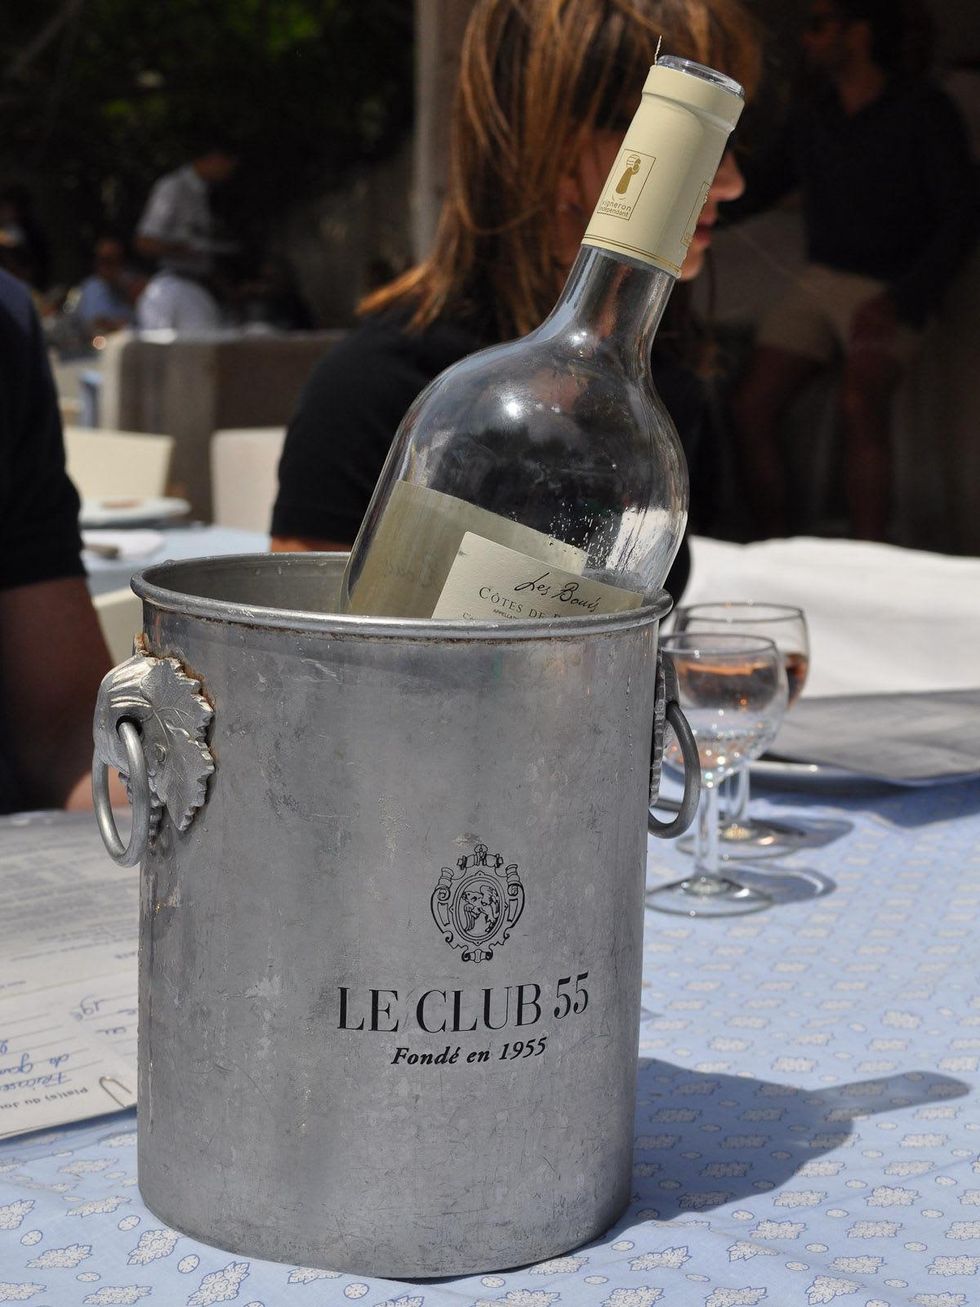 13 Shelby France Le Club Cinq Cinq June 2013 wine and wine bucket